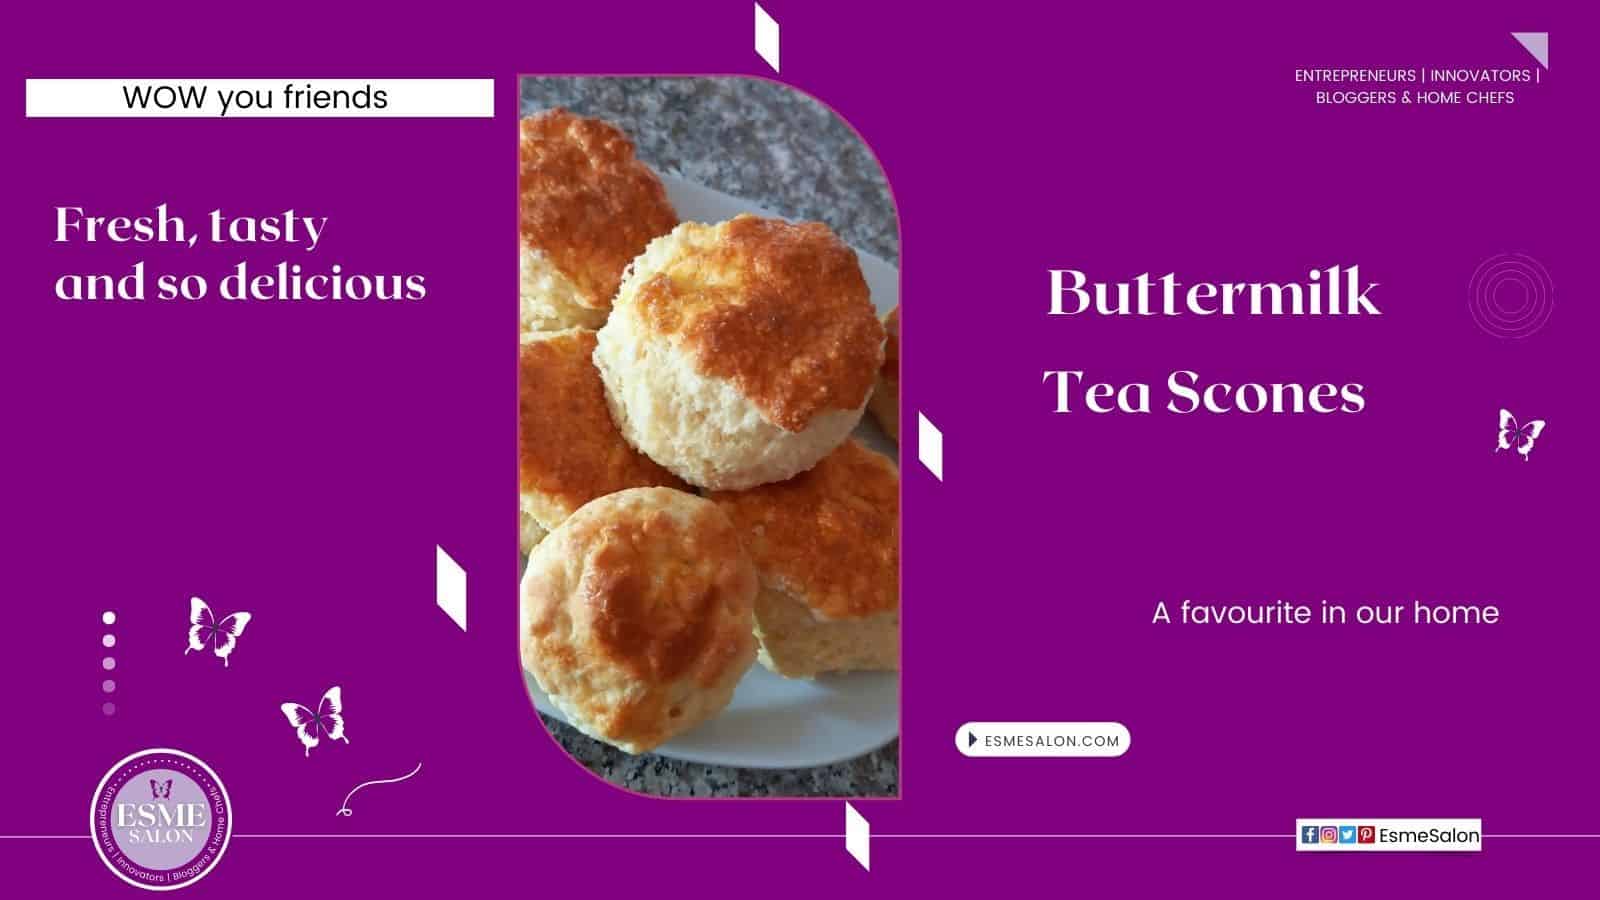 An image of a platter filled with freshly baked Buttermilk Tea Scones